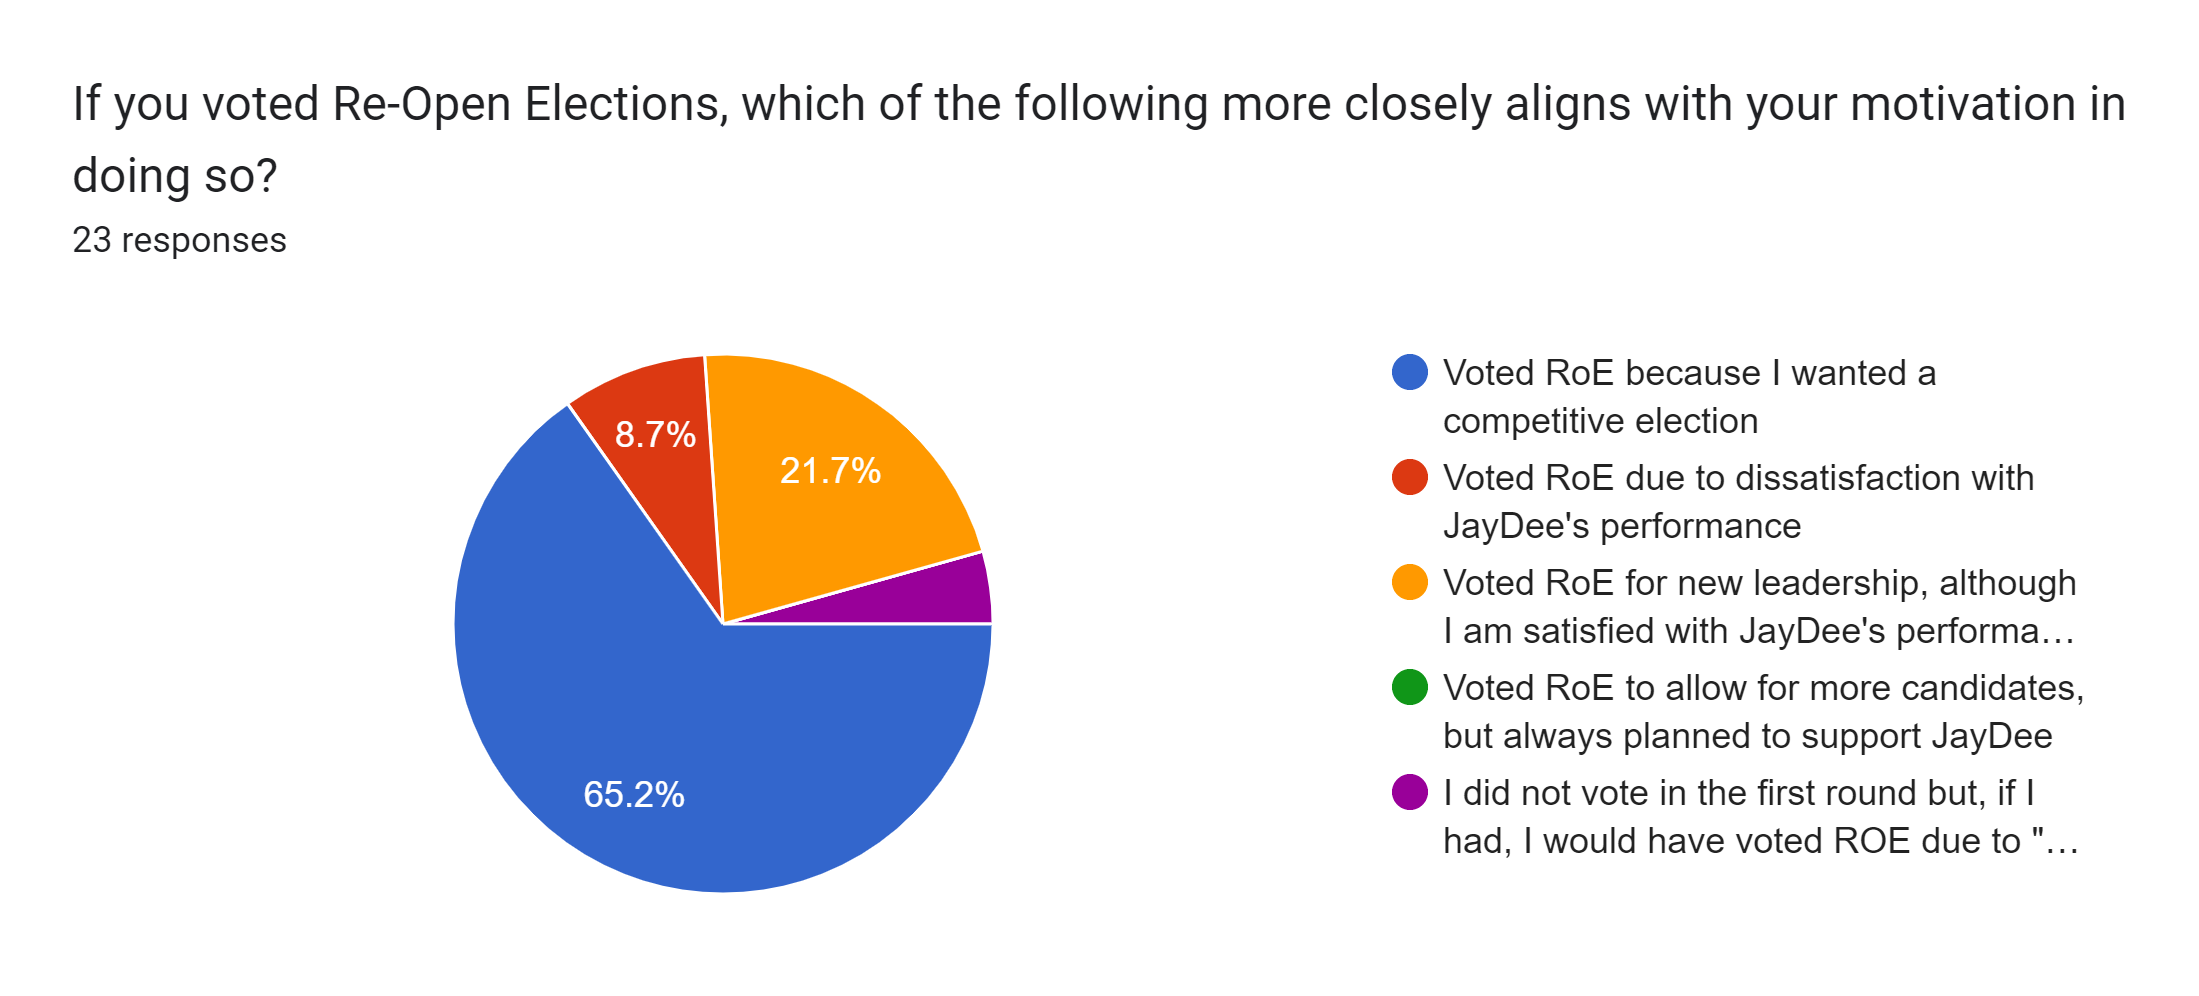 Forms response chart. Question title: If you voted Re-Open Elections, which of the following more closely aligns with your motivation in doing so?. Number of responses: 23 responses.